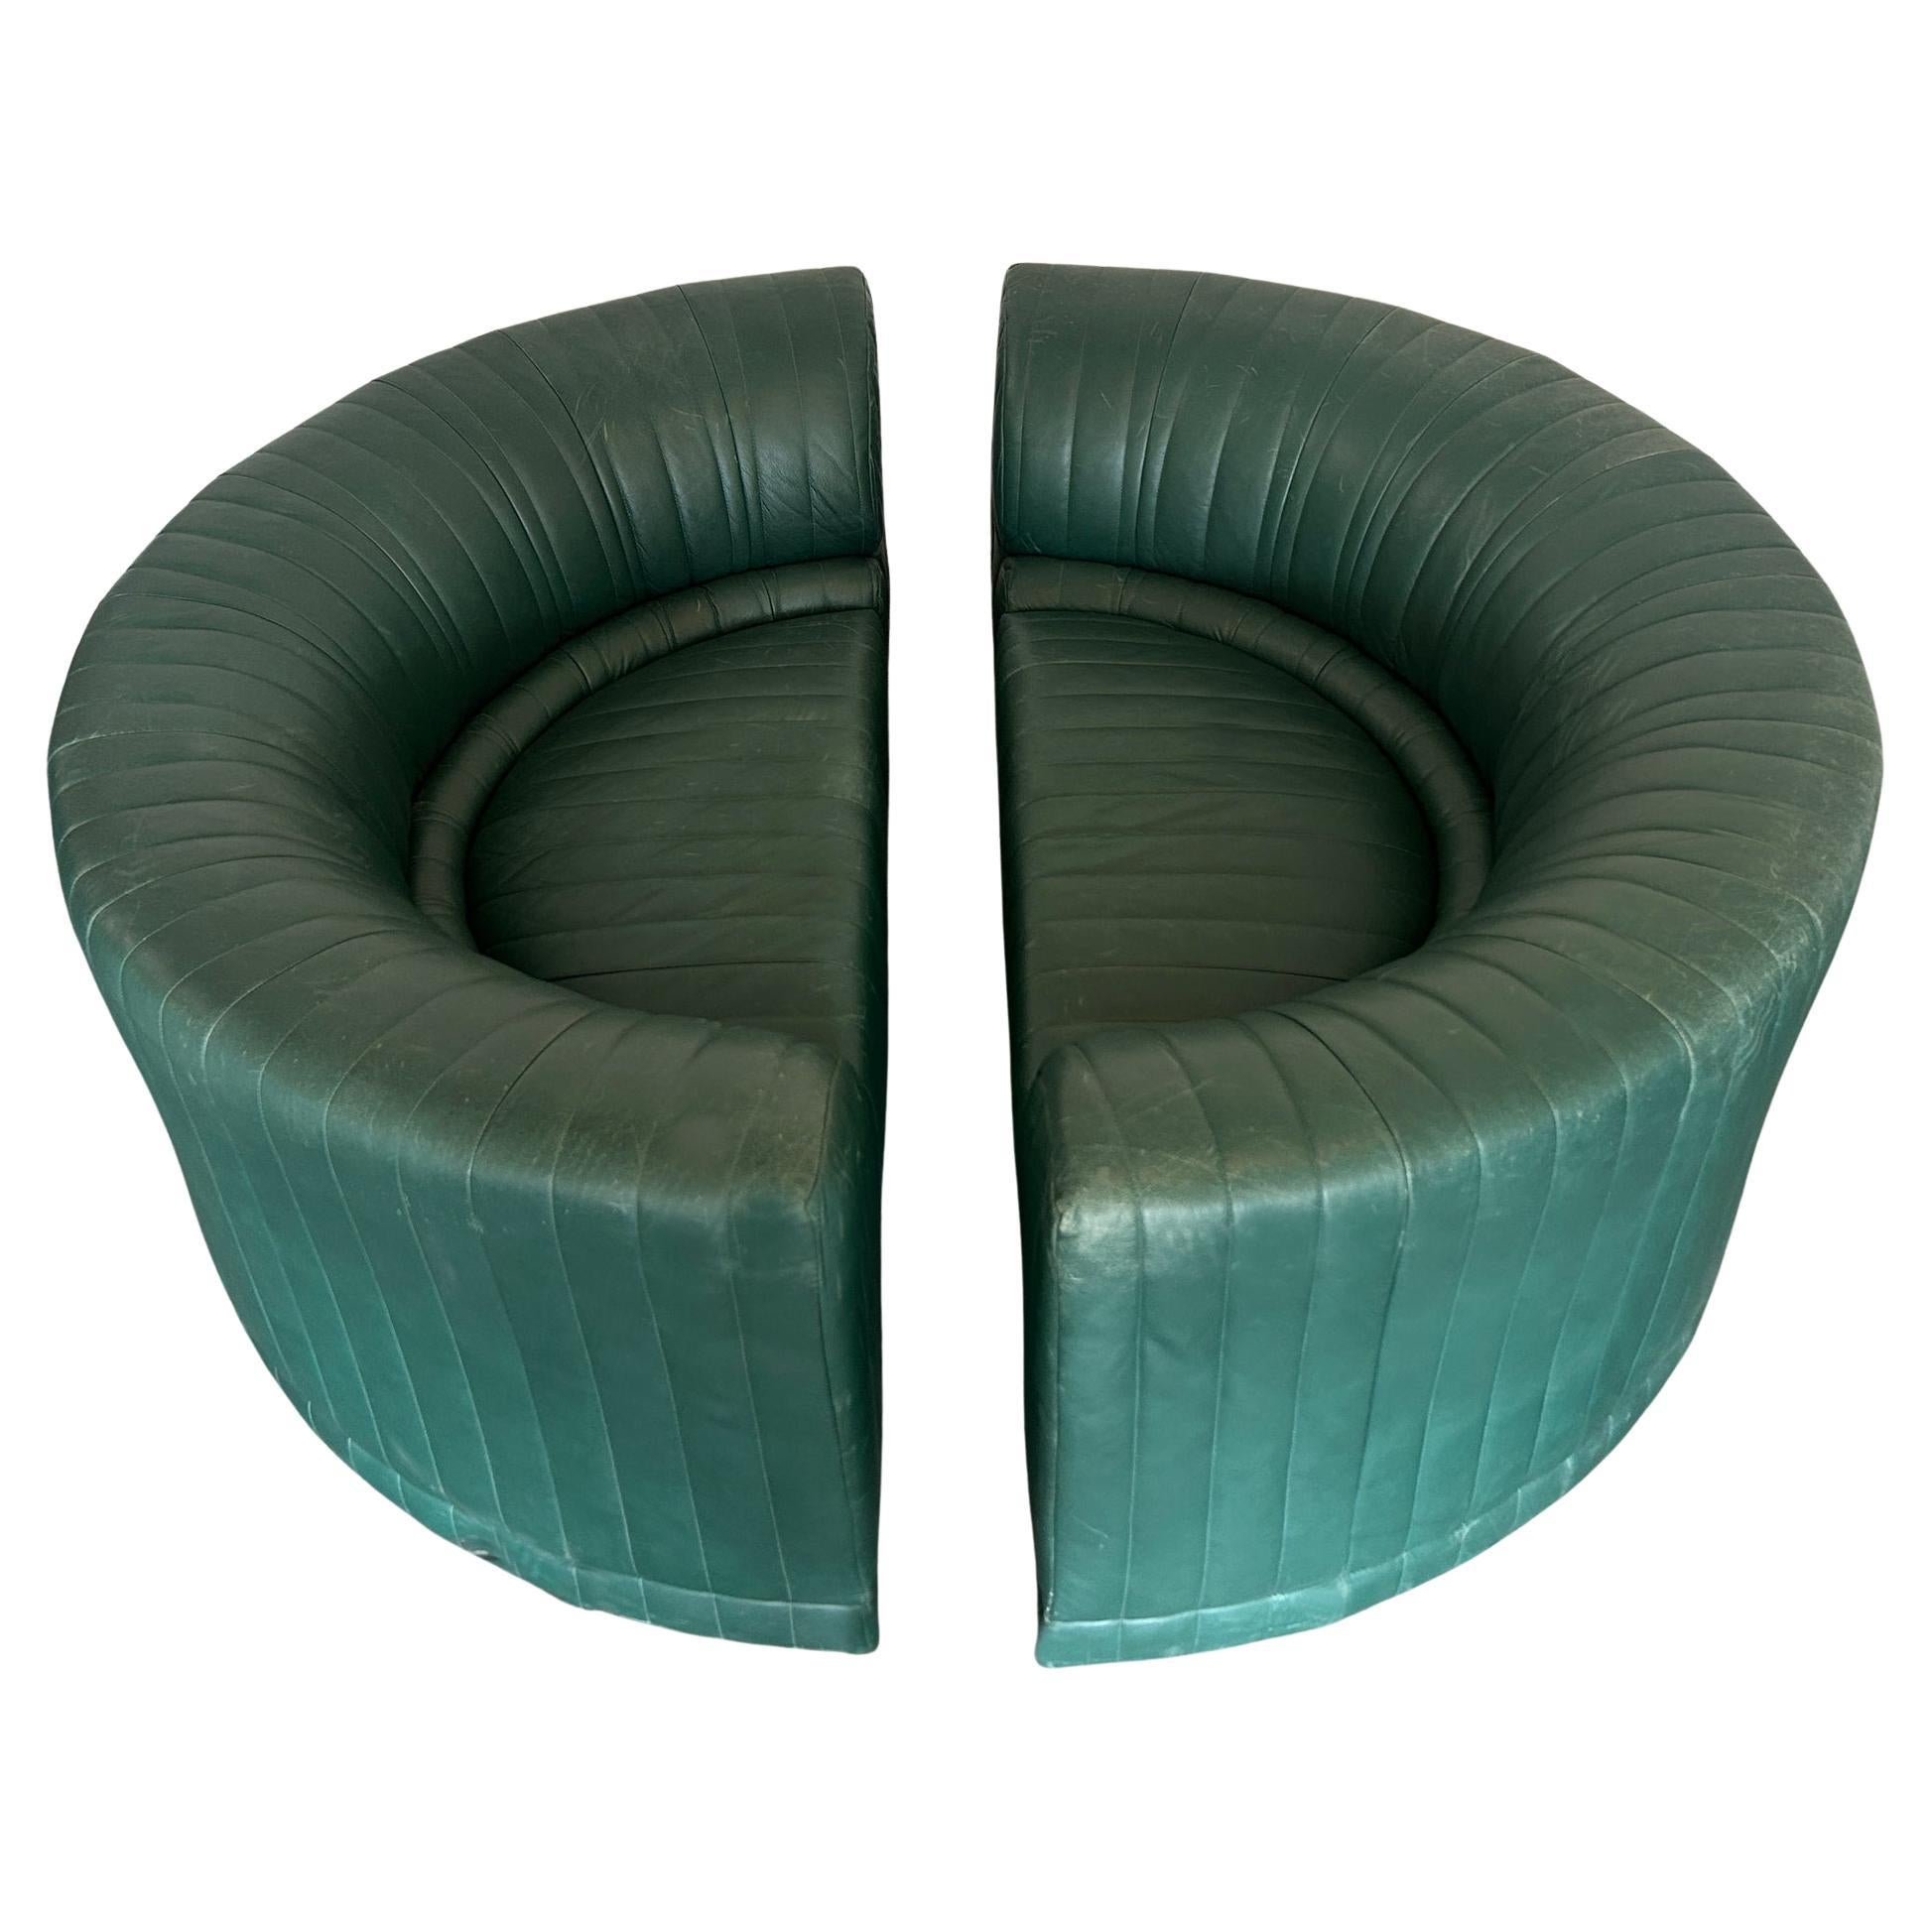 Pair Post Modern Half Round Section of Roche Bobois Green Leather Sofas 1983